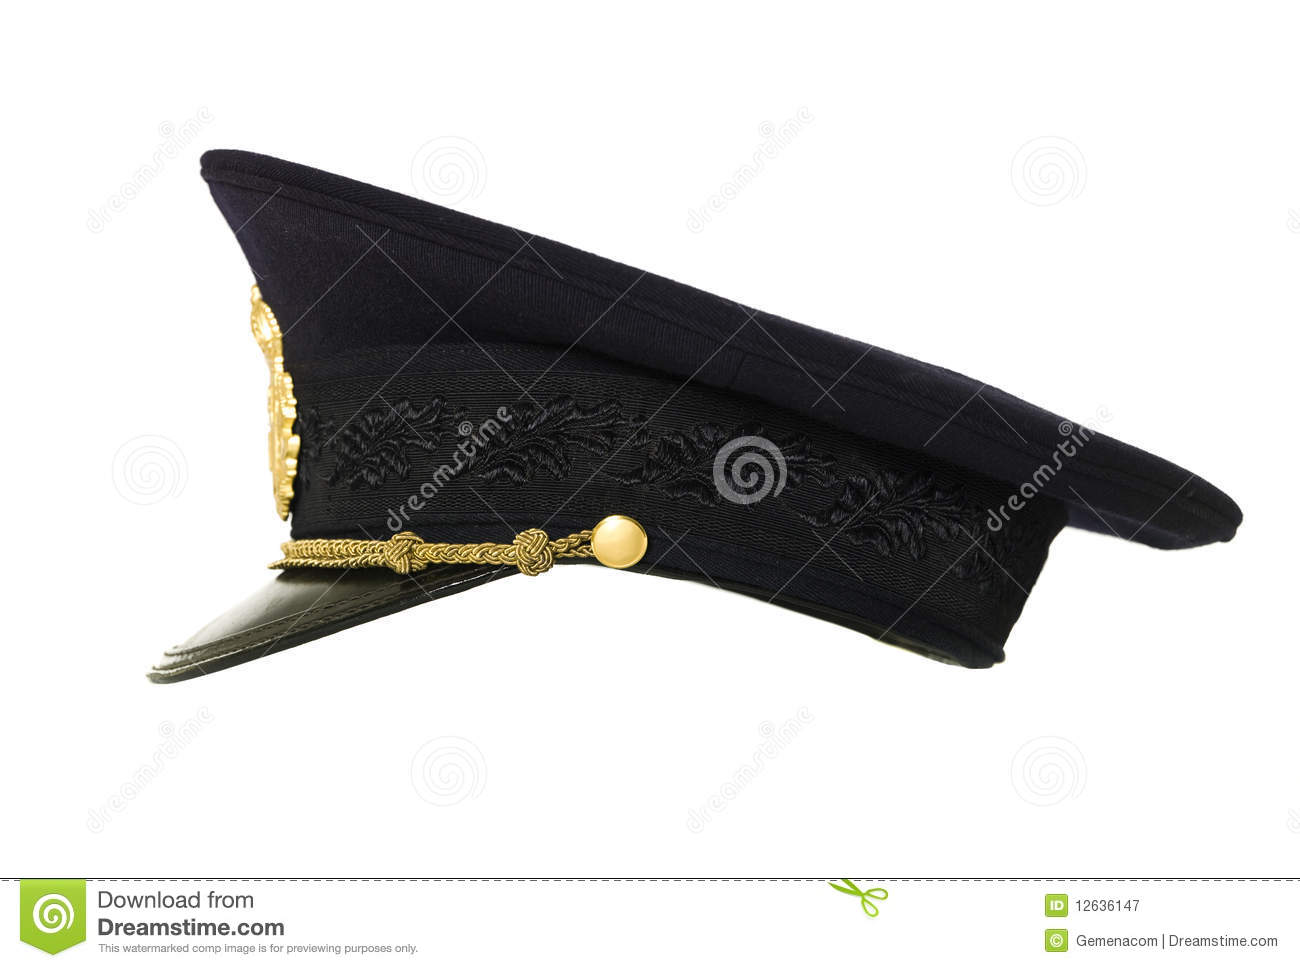 Police Hat Isolated On White Background Mr No Pr No 2 763 4